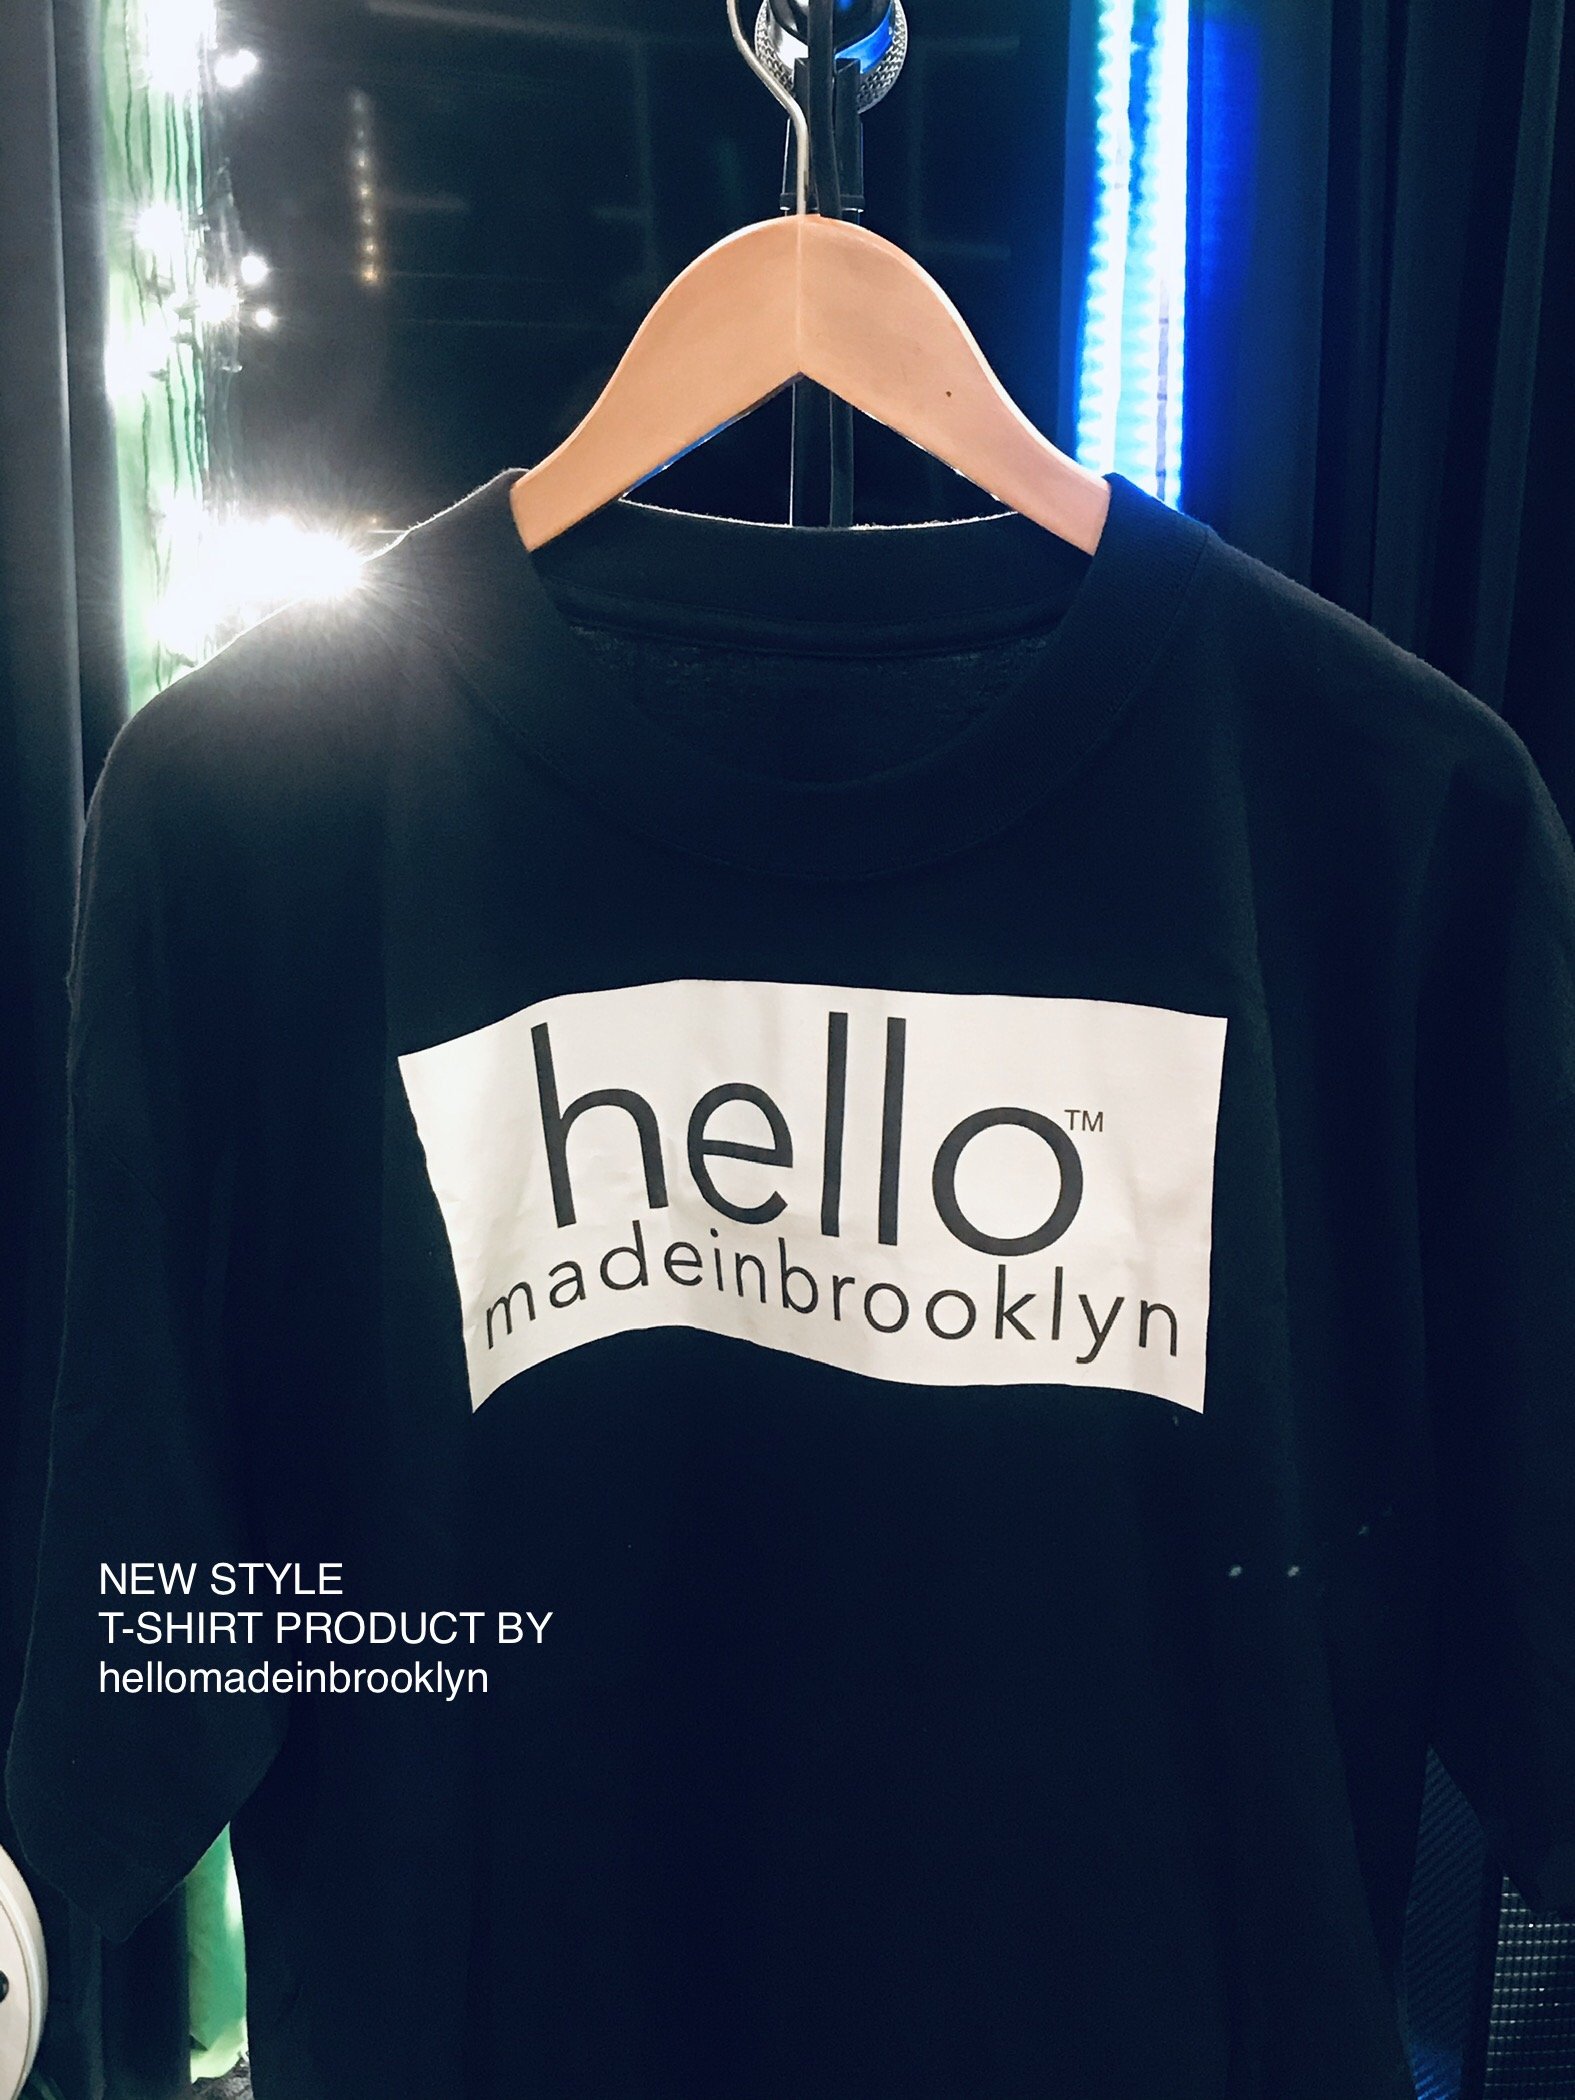 New Product By HELLO MADE IN BROOKLYN® T-Shirts LOGO Graphic - Women's and Men's Cotton:Poly White - T-Shirt From hello made in brooklyn product company - new style street fashion black and white+custom order pre-order ® hellomadeinbrooklyn.jpg